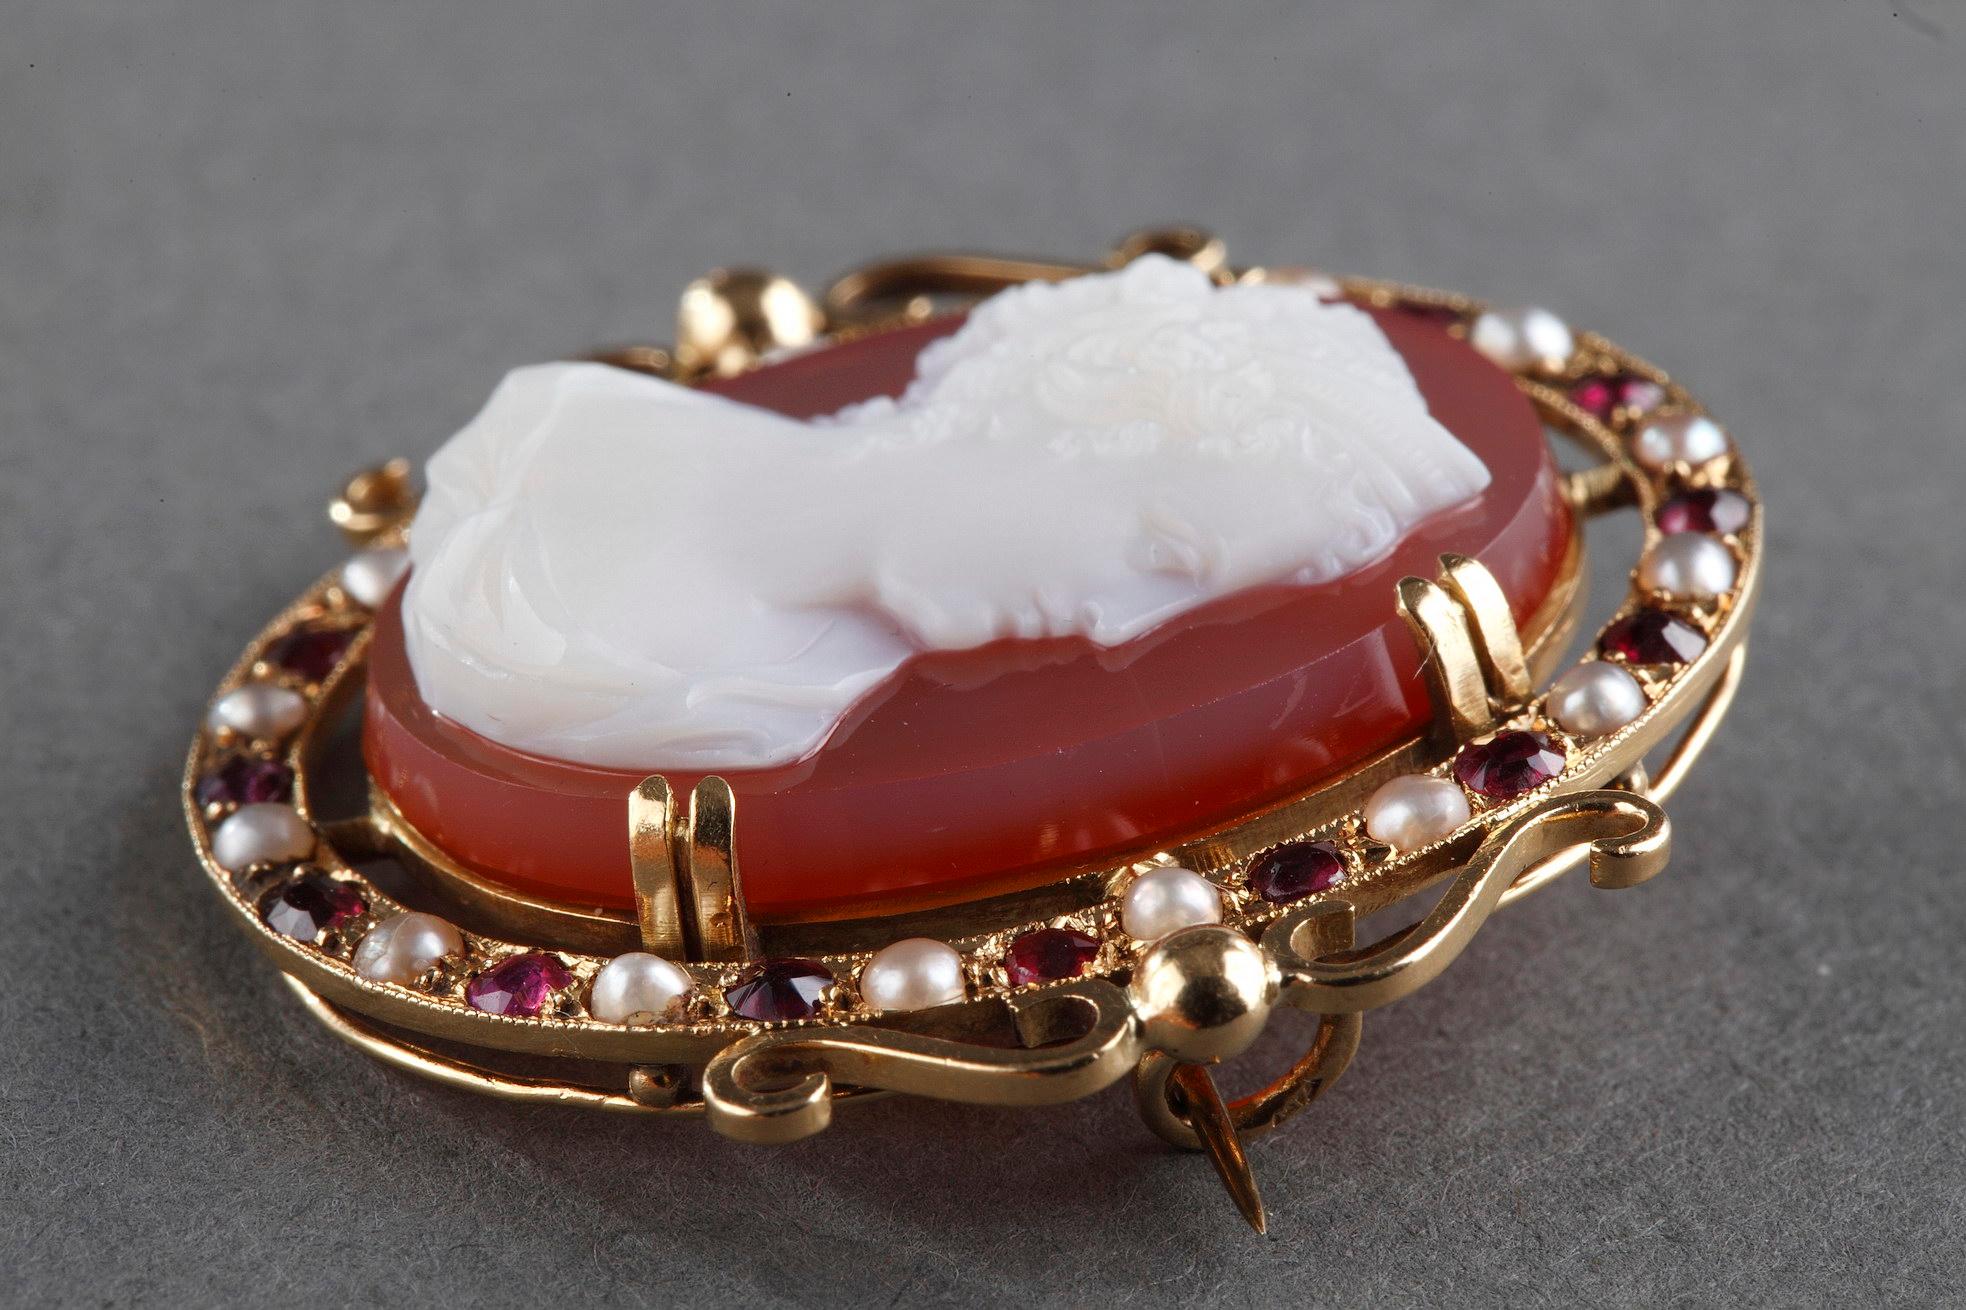 Gold Brooch with Agate Cameo and Pearls, Mid-19th Century For Sale 1